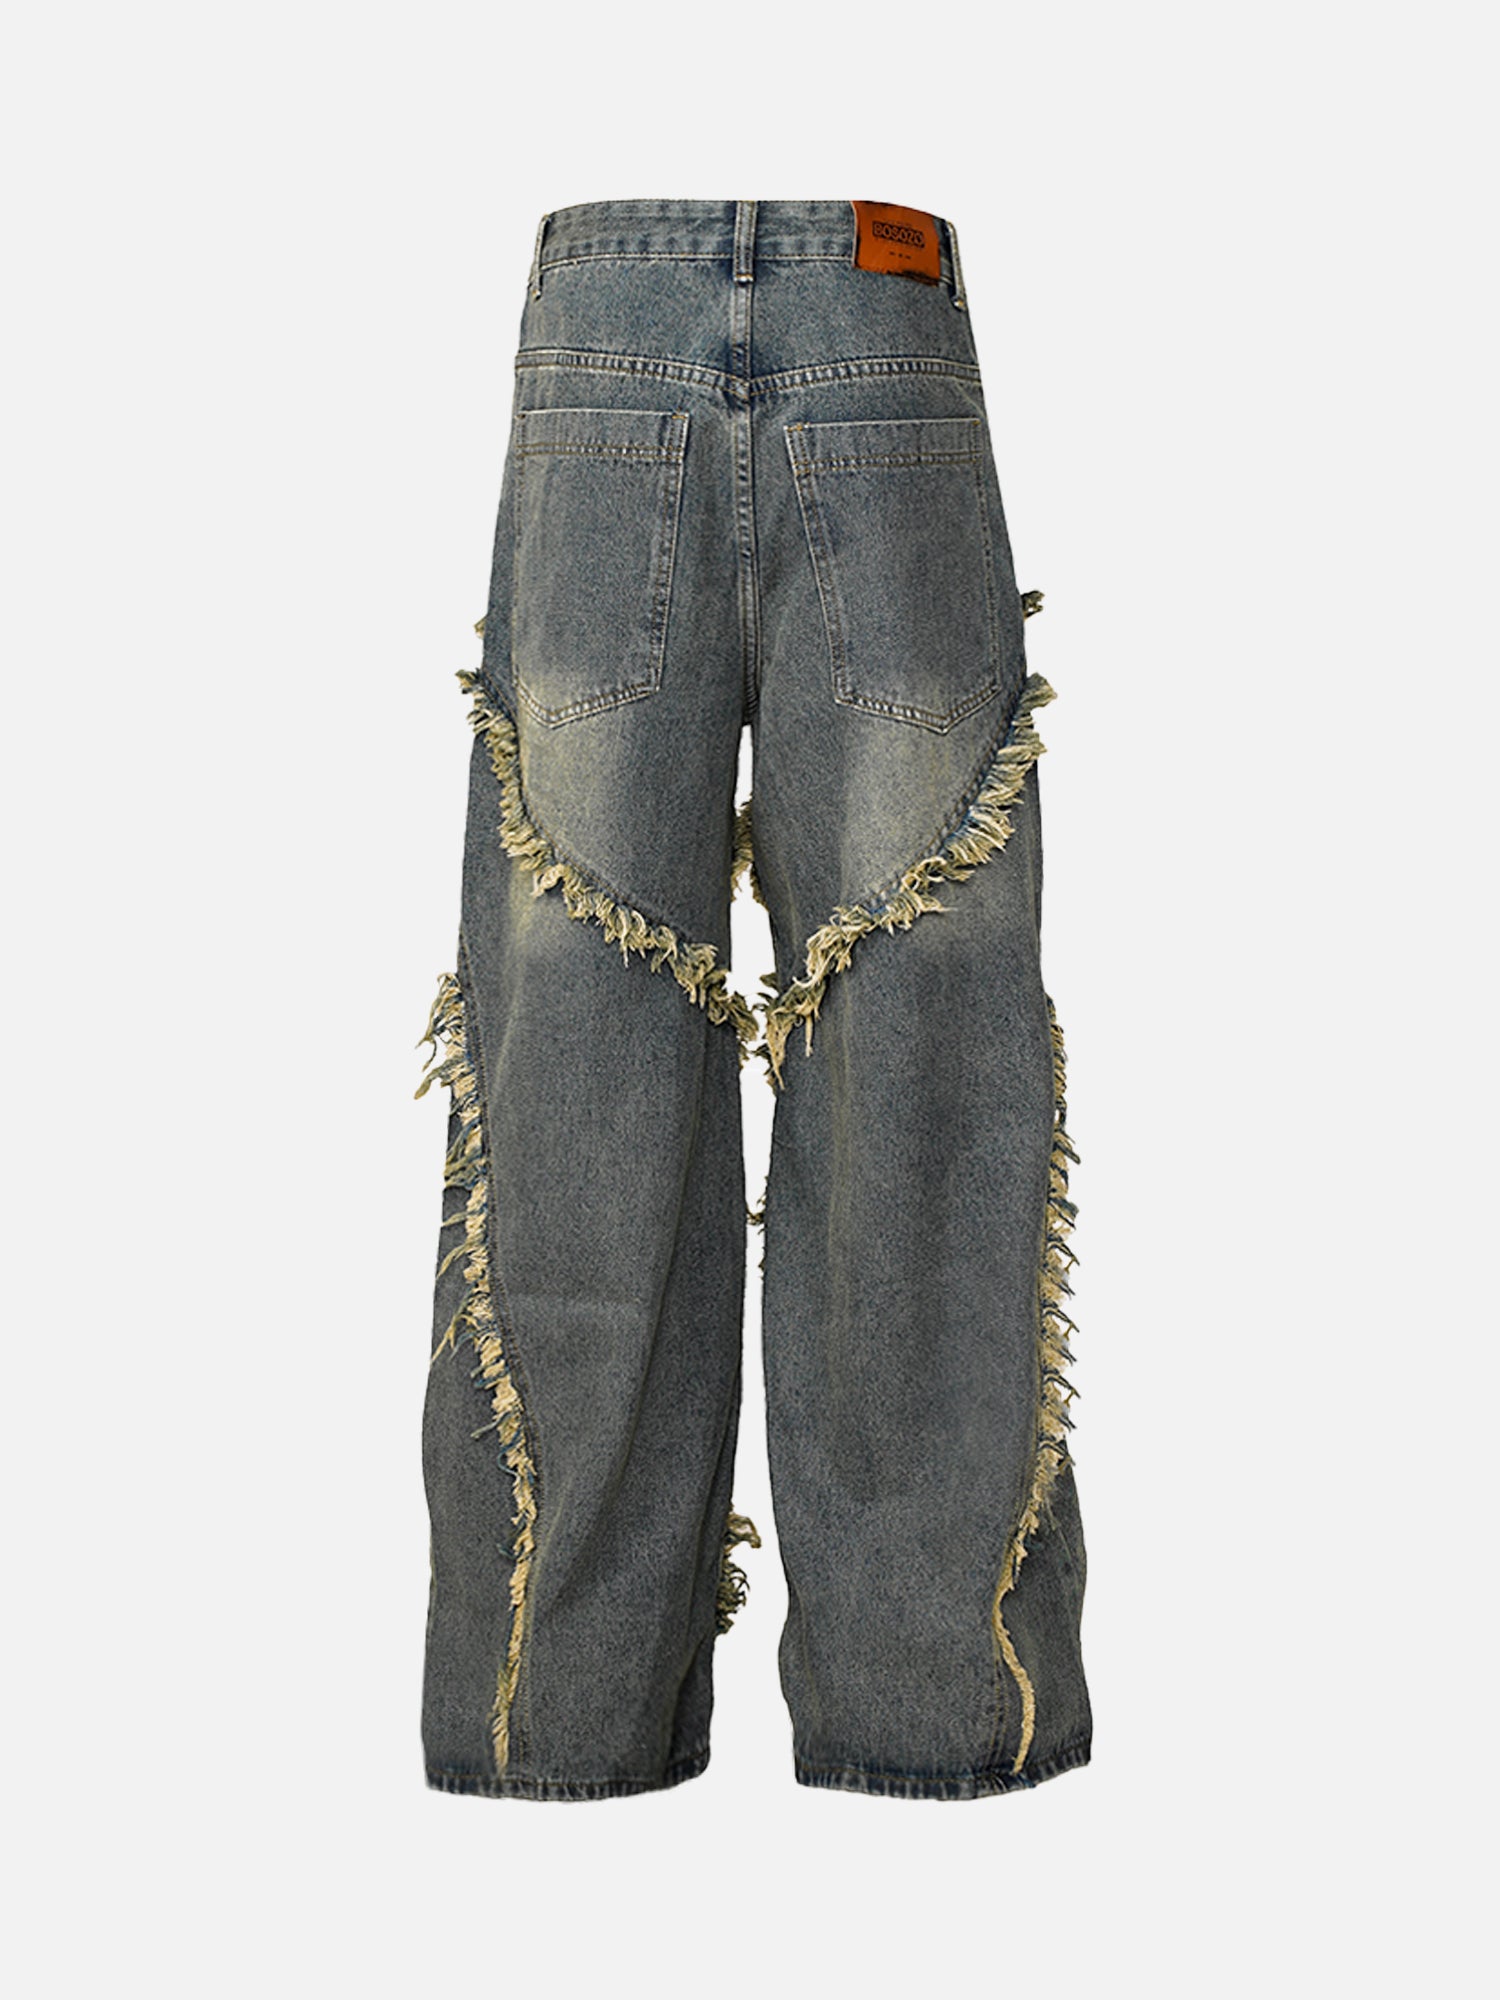 Thesupermade High Street Hip Hop Washed Distressed Jeans - 2069